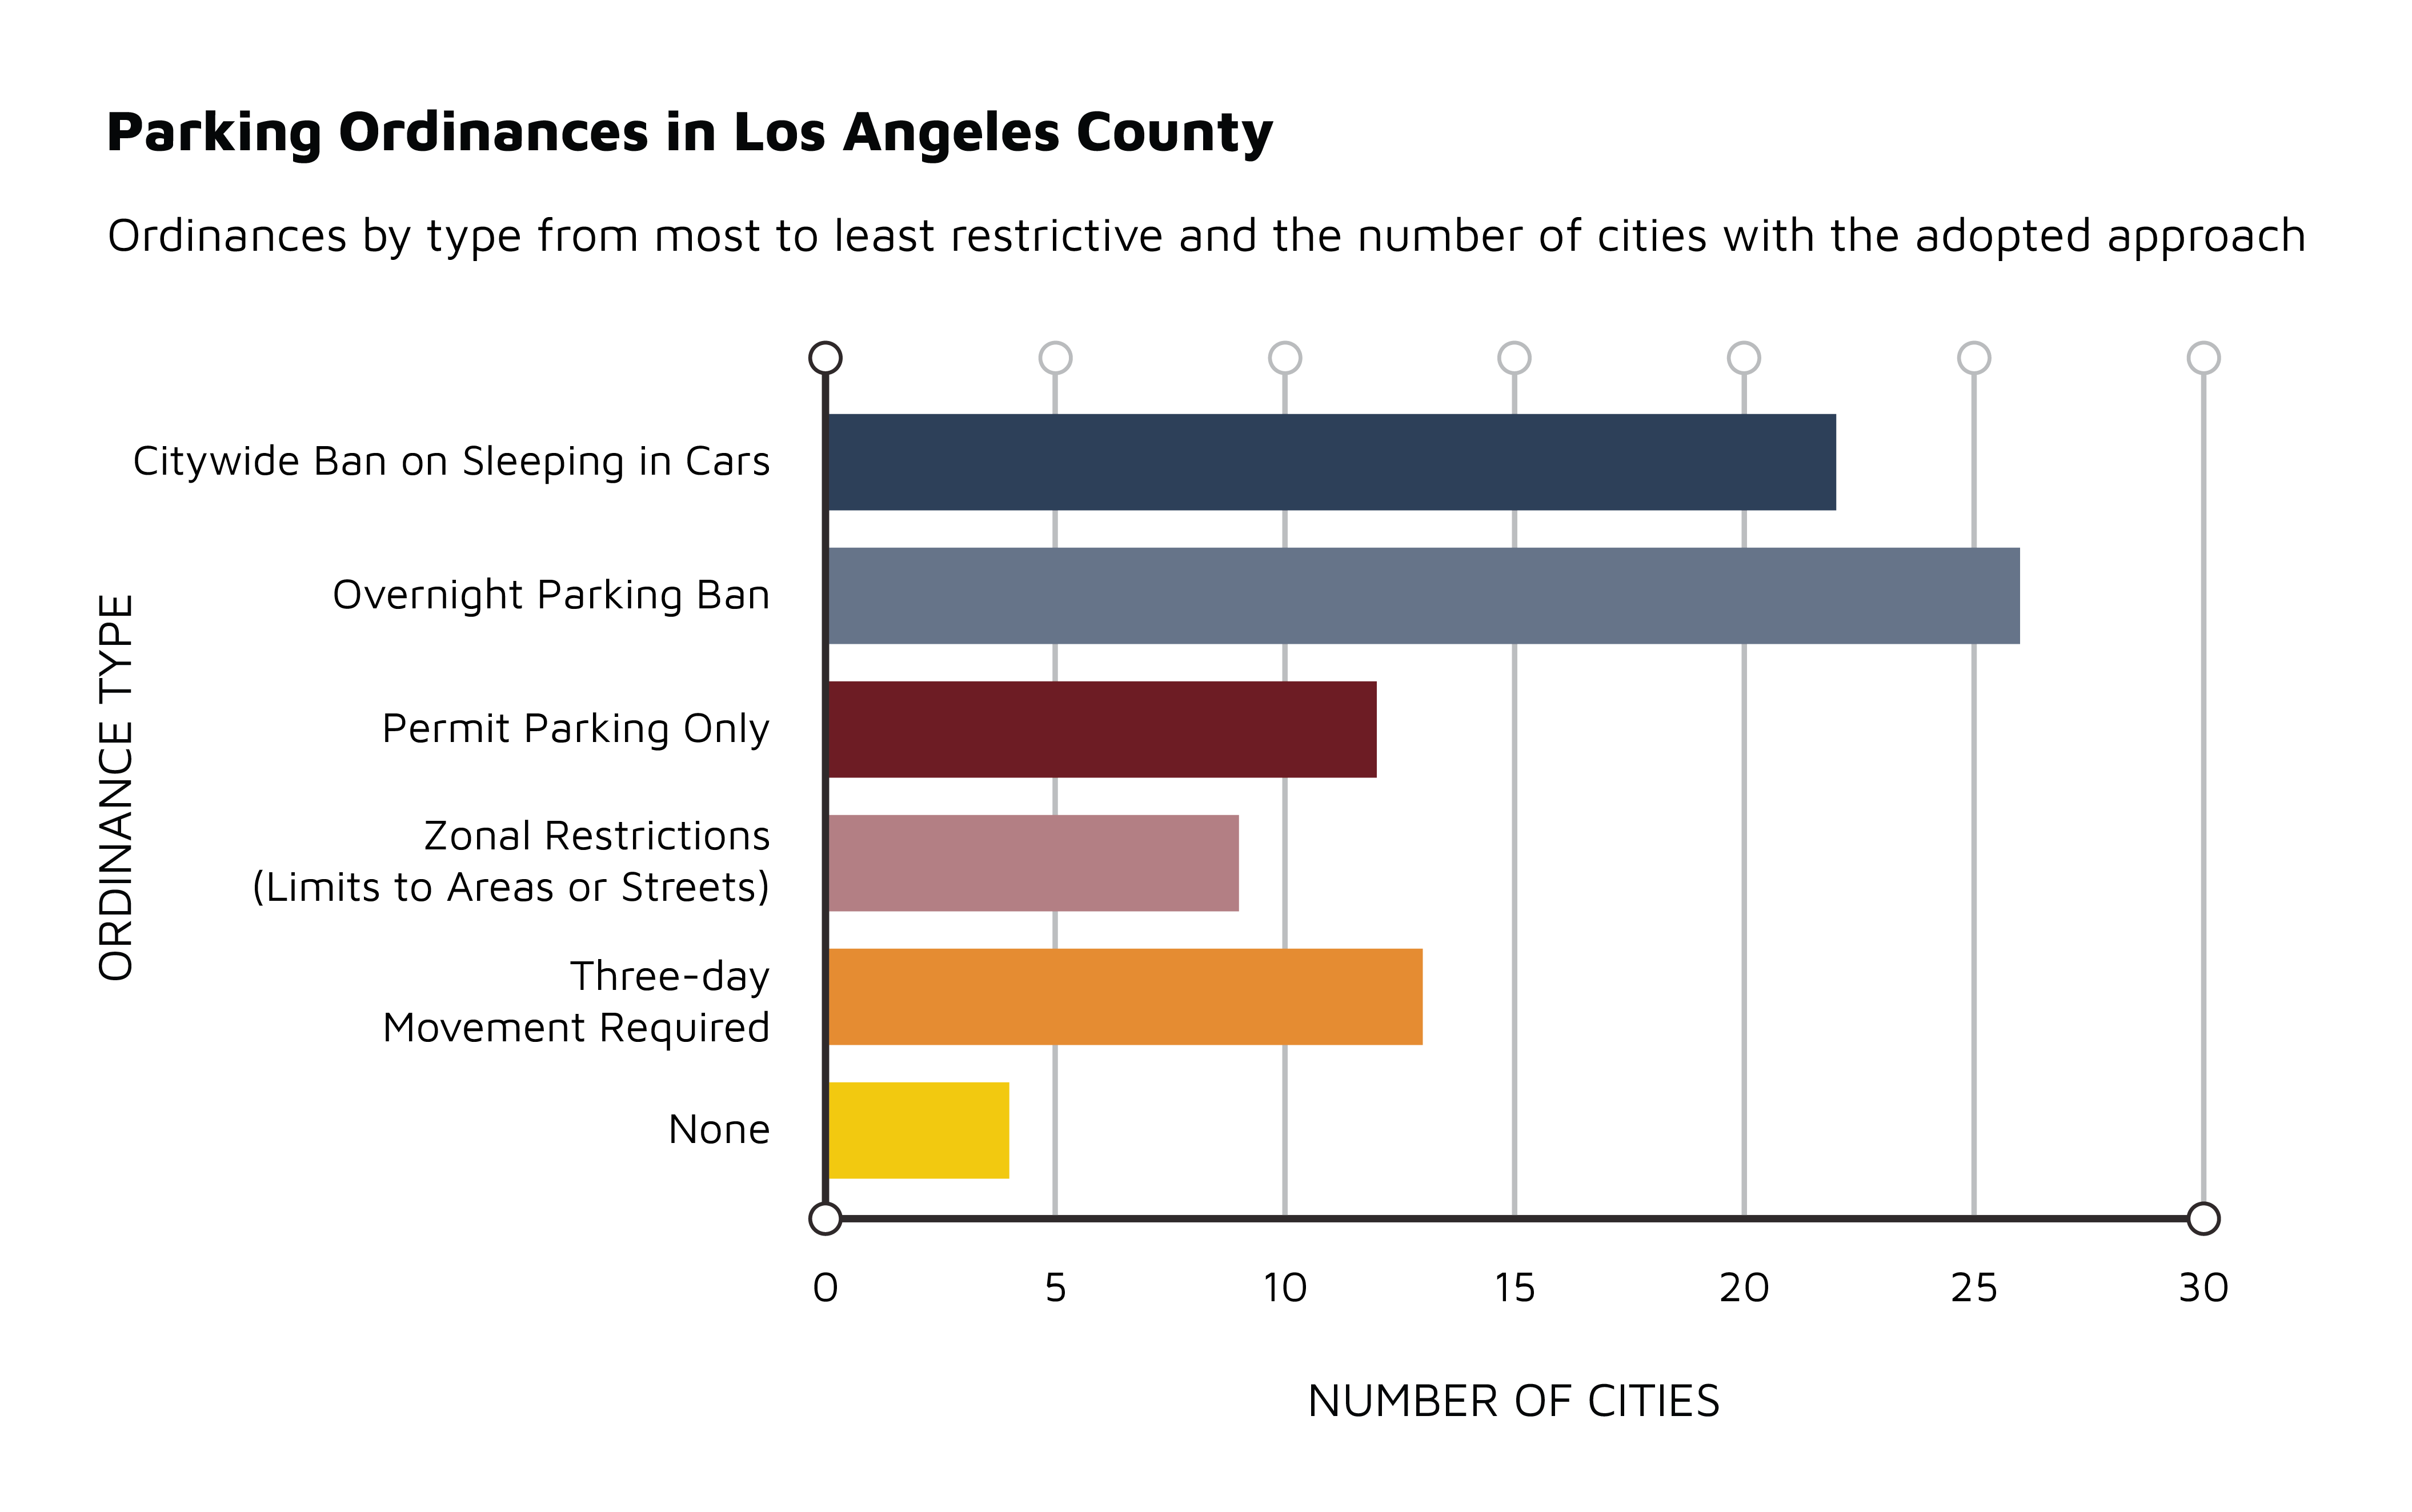 Ordinances by type from most to least restrictive and the number of cities with the adopted approach